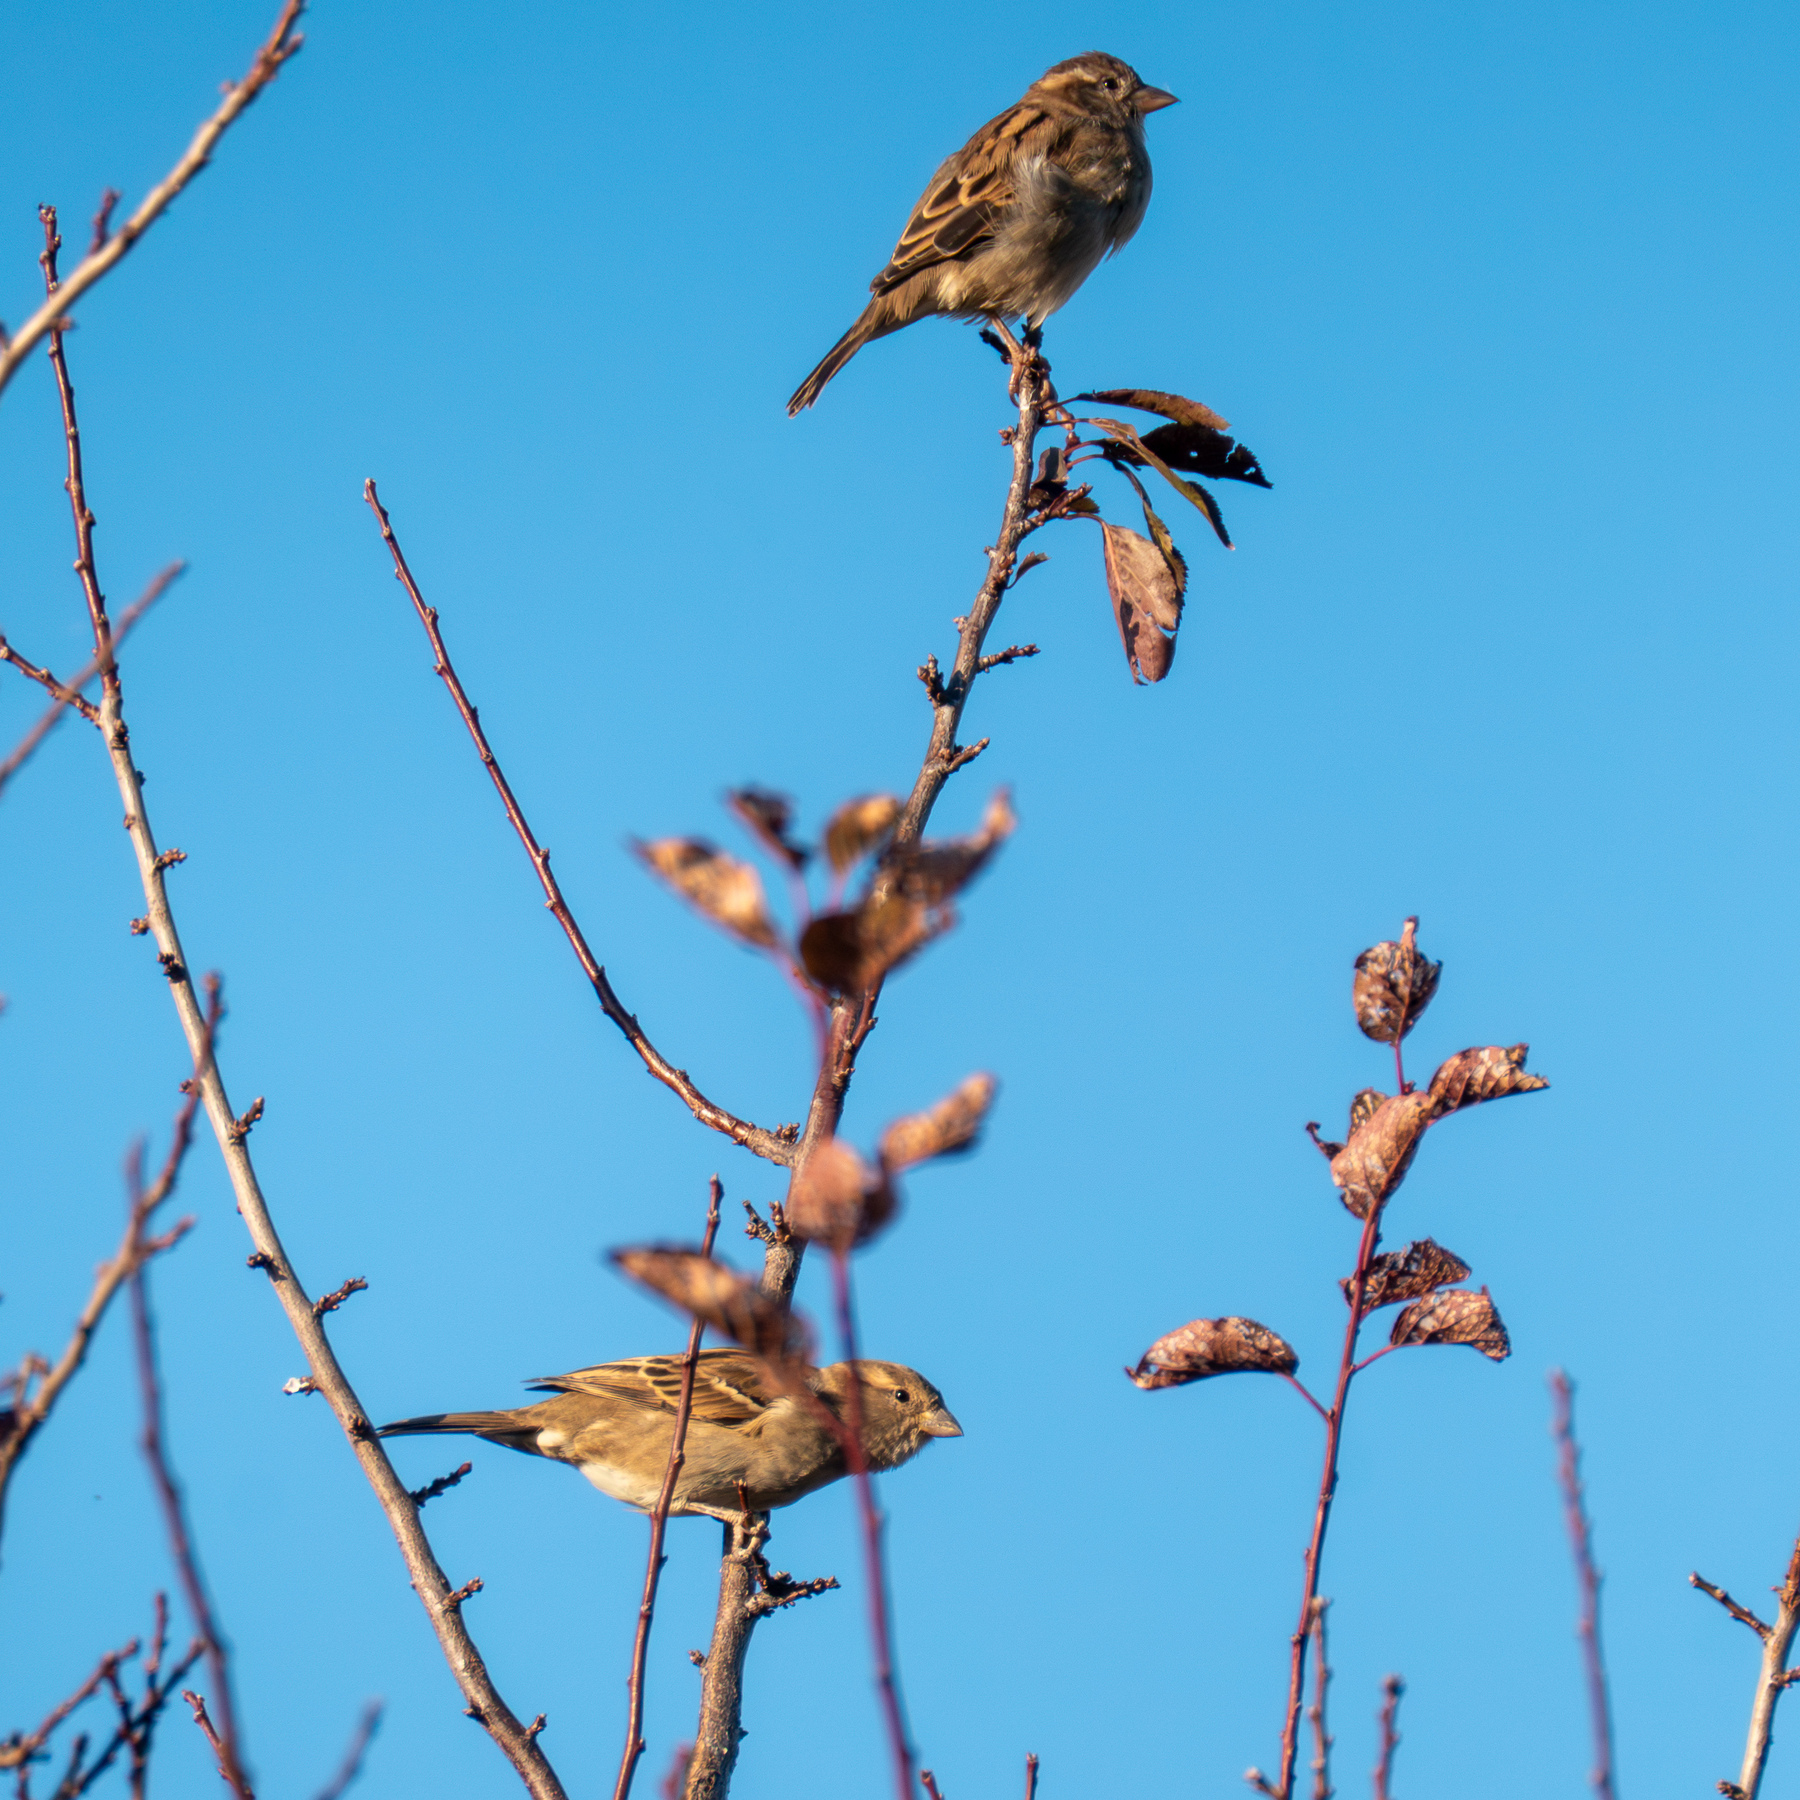 Two sparrows sitting on a branch of a small tree.